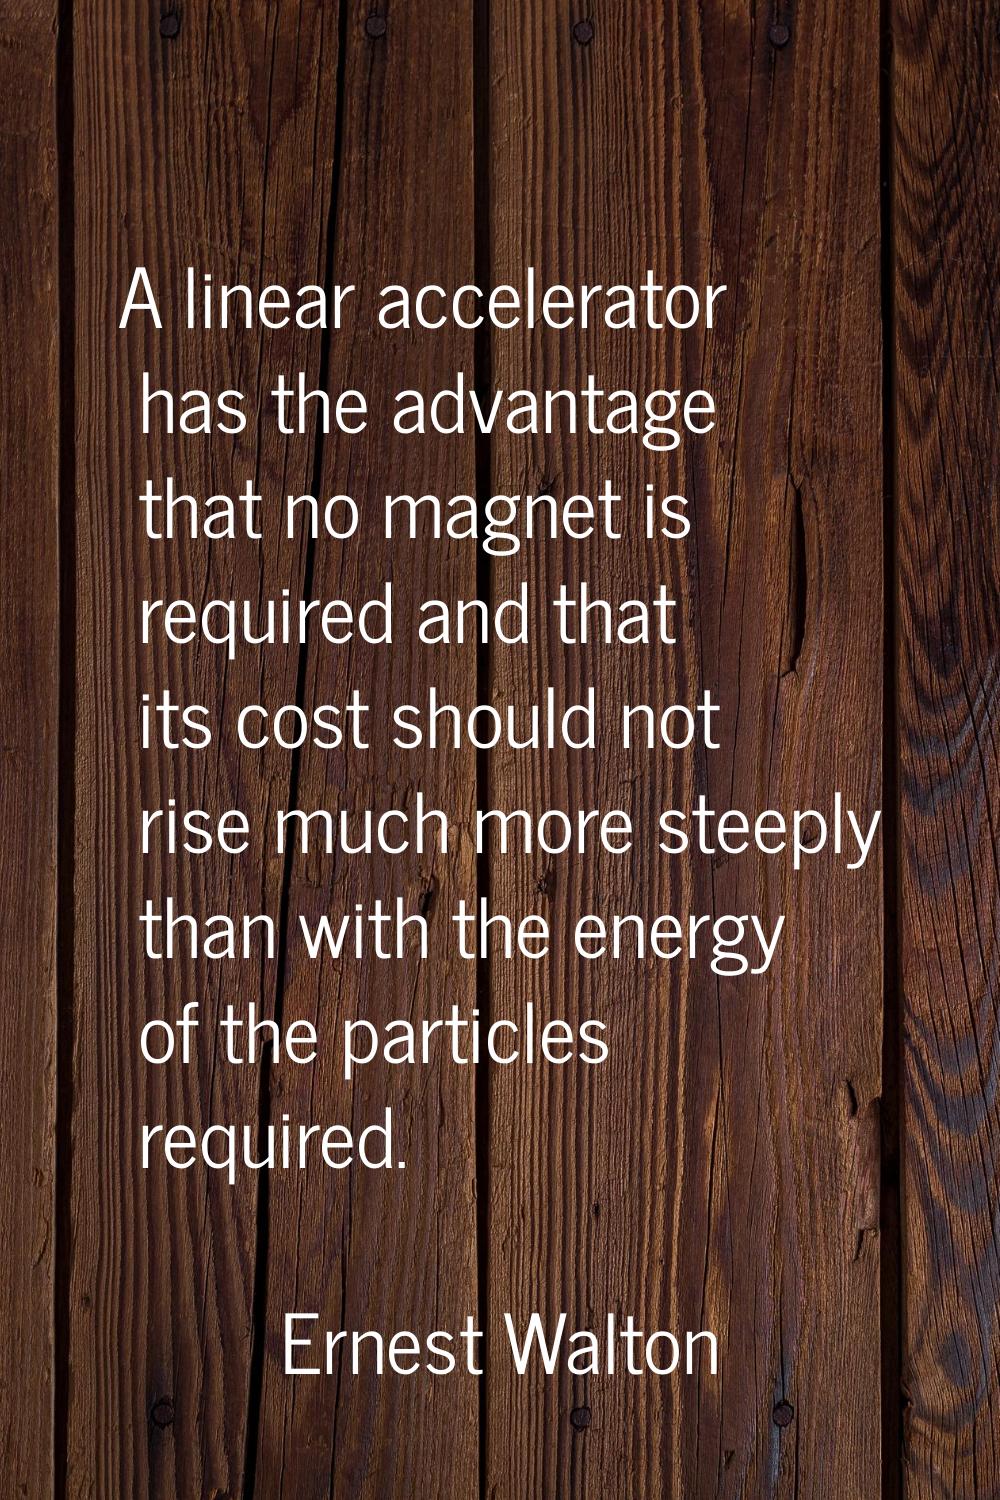 A linear accelerator has the advantage that no magnet is required and that its cost should not rise